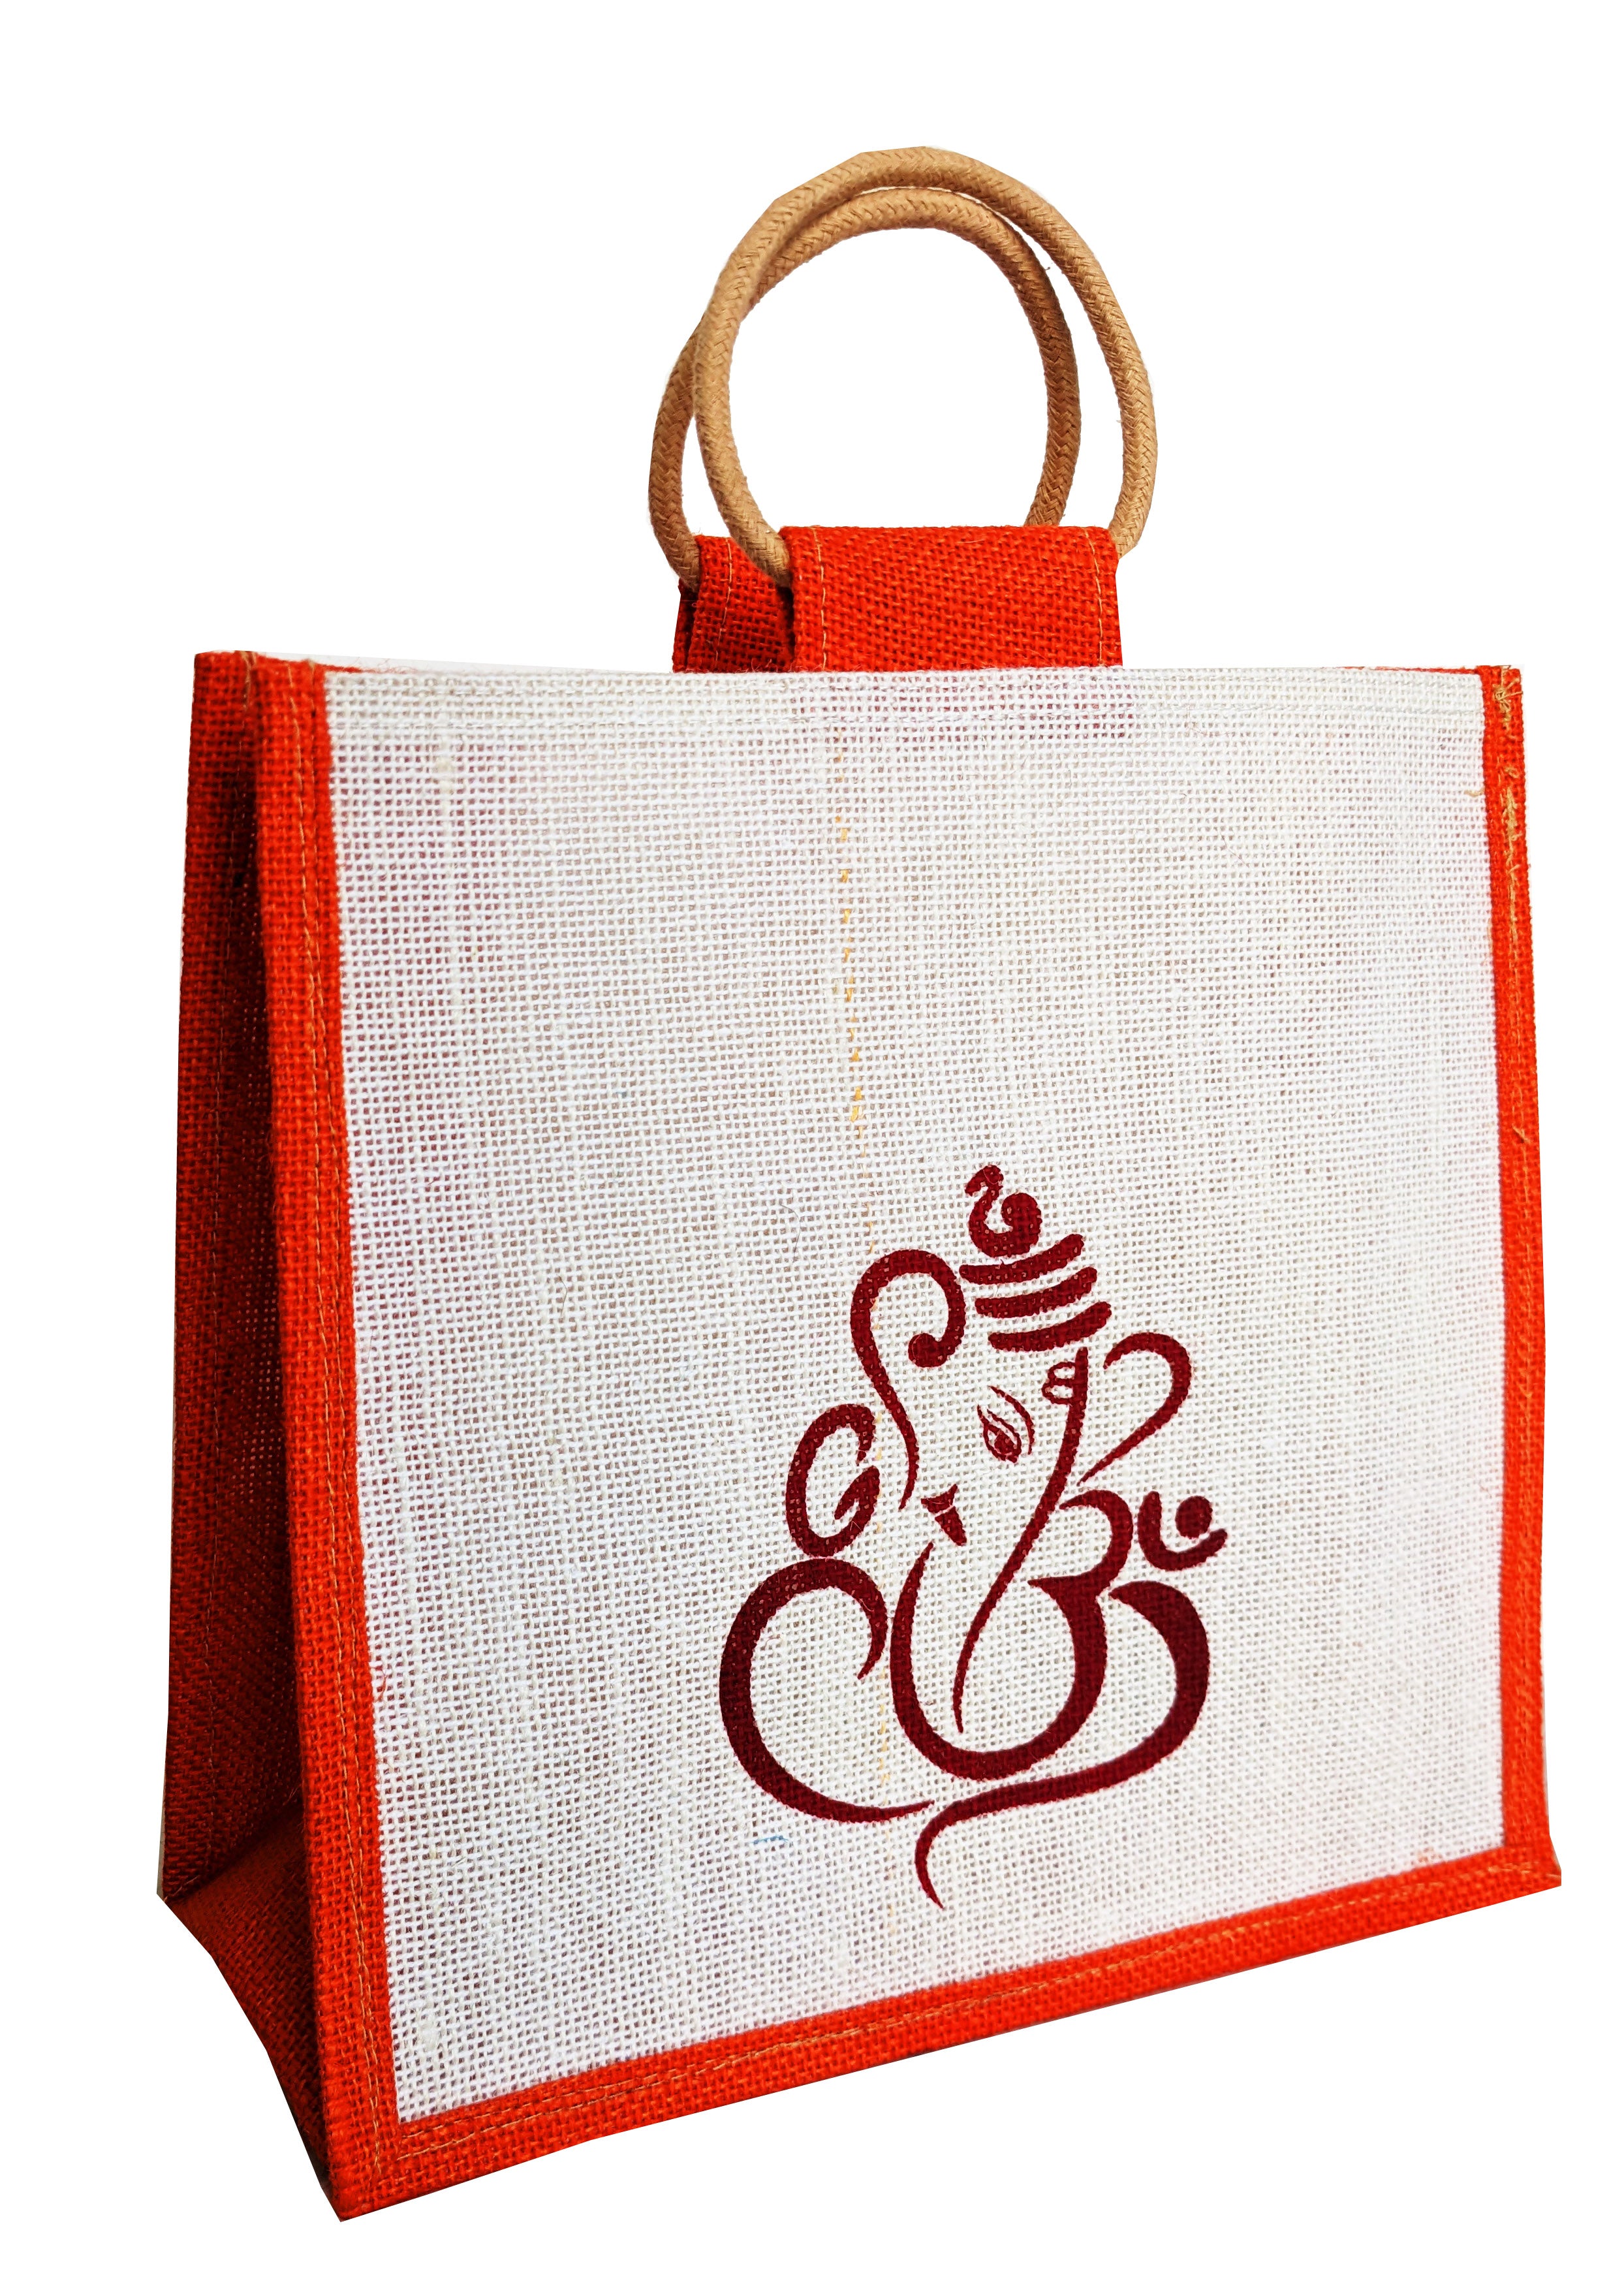 Promotional Jute Bags | Promotional Bags with Logo | Everything Bags Inc